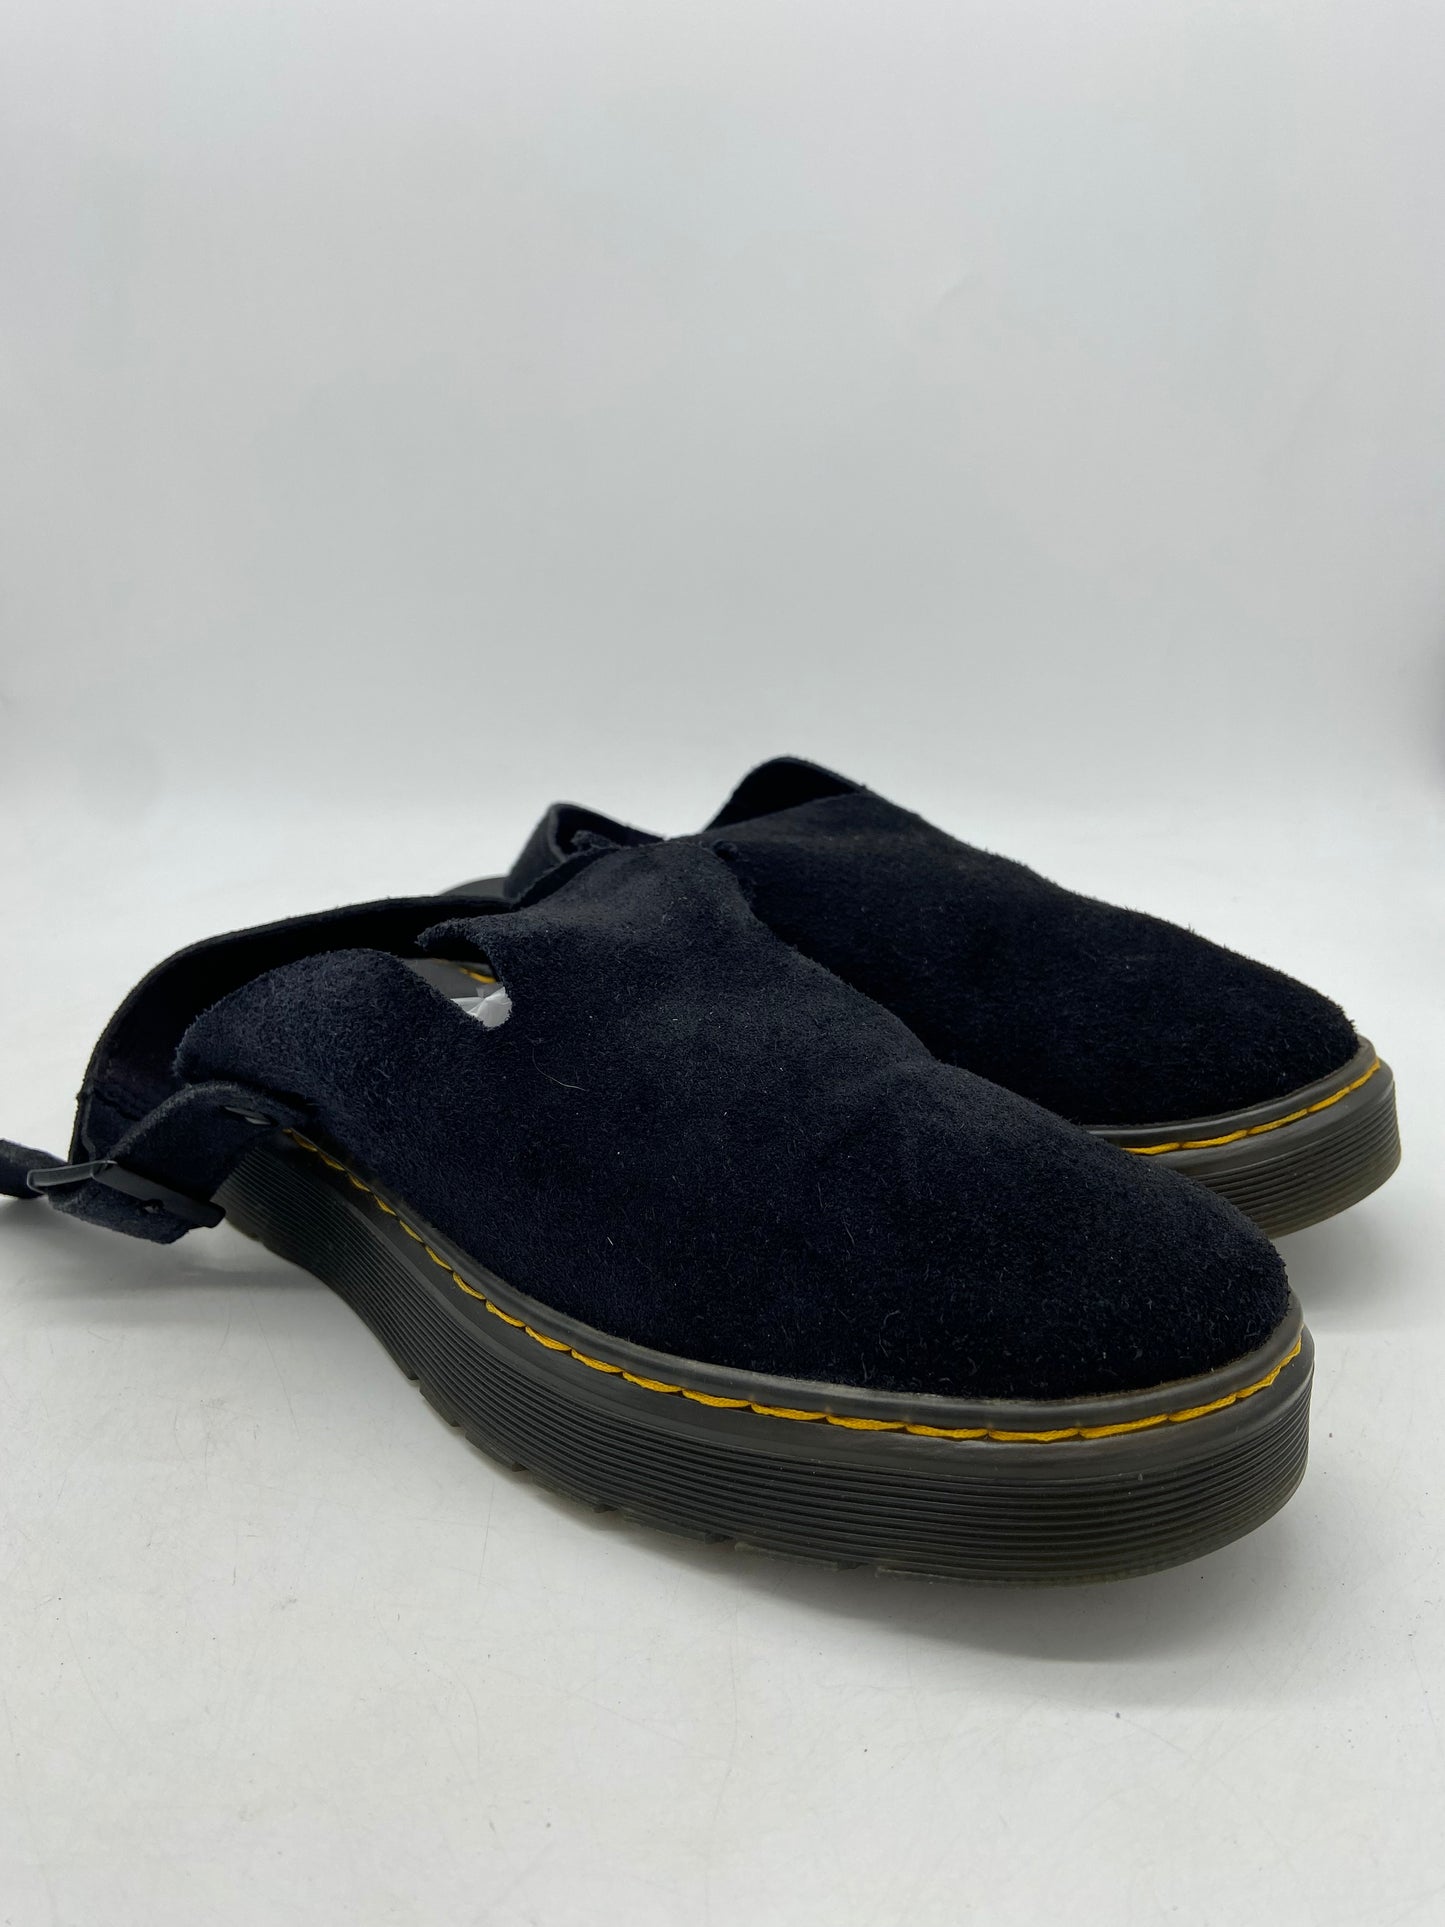 Dr. Martens CARLSON SUEDE CASUAL SLINGBACK MULES Sz 8M